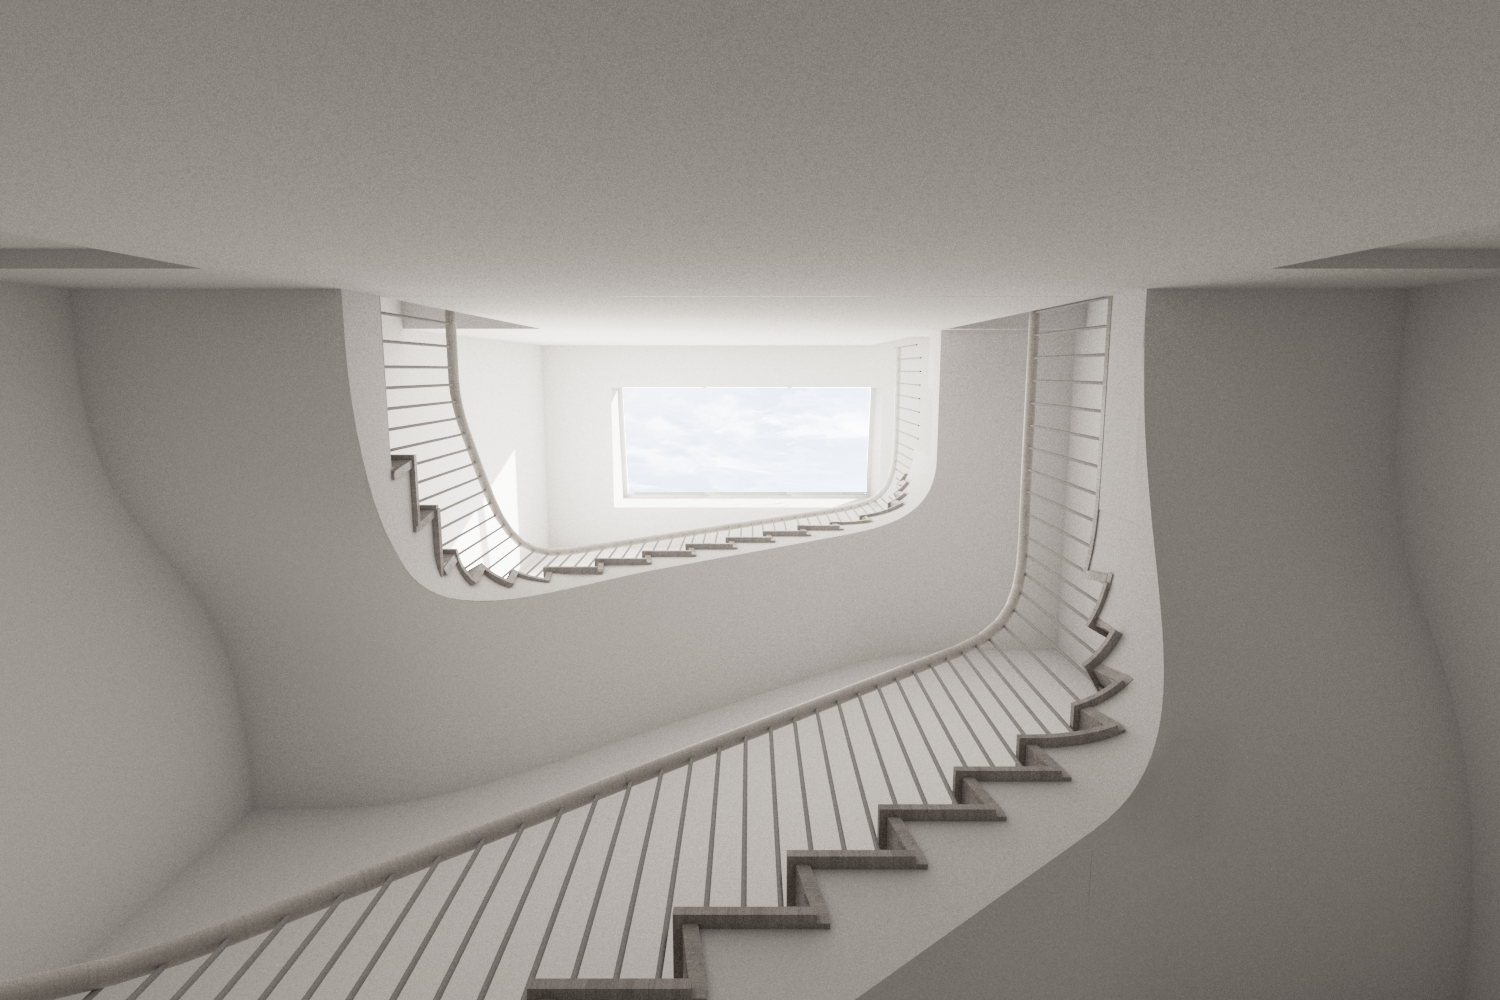 Stair Skylight 1 - edited.png